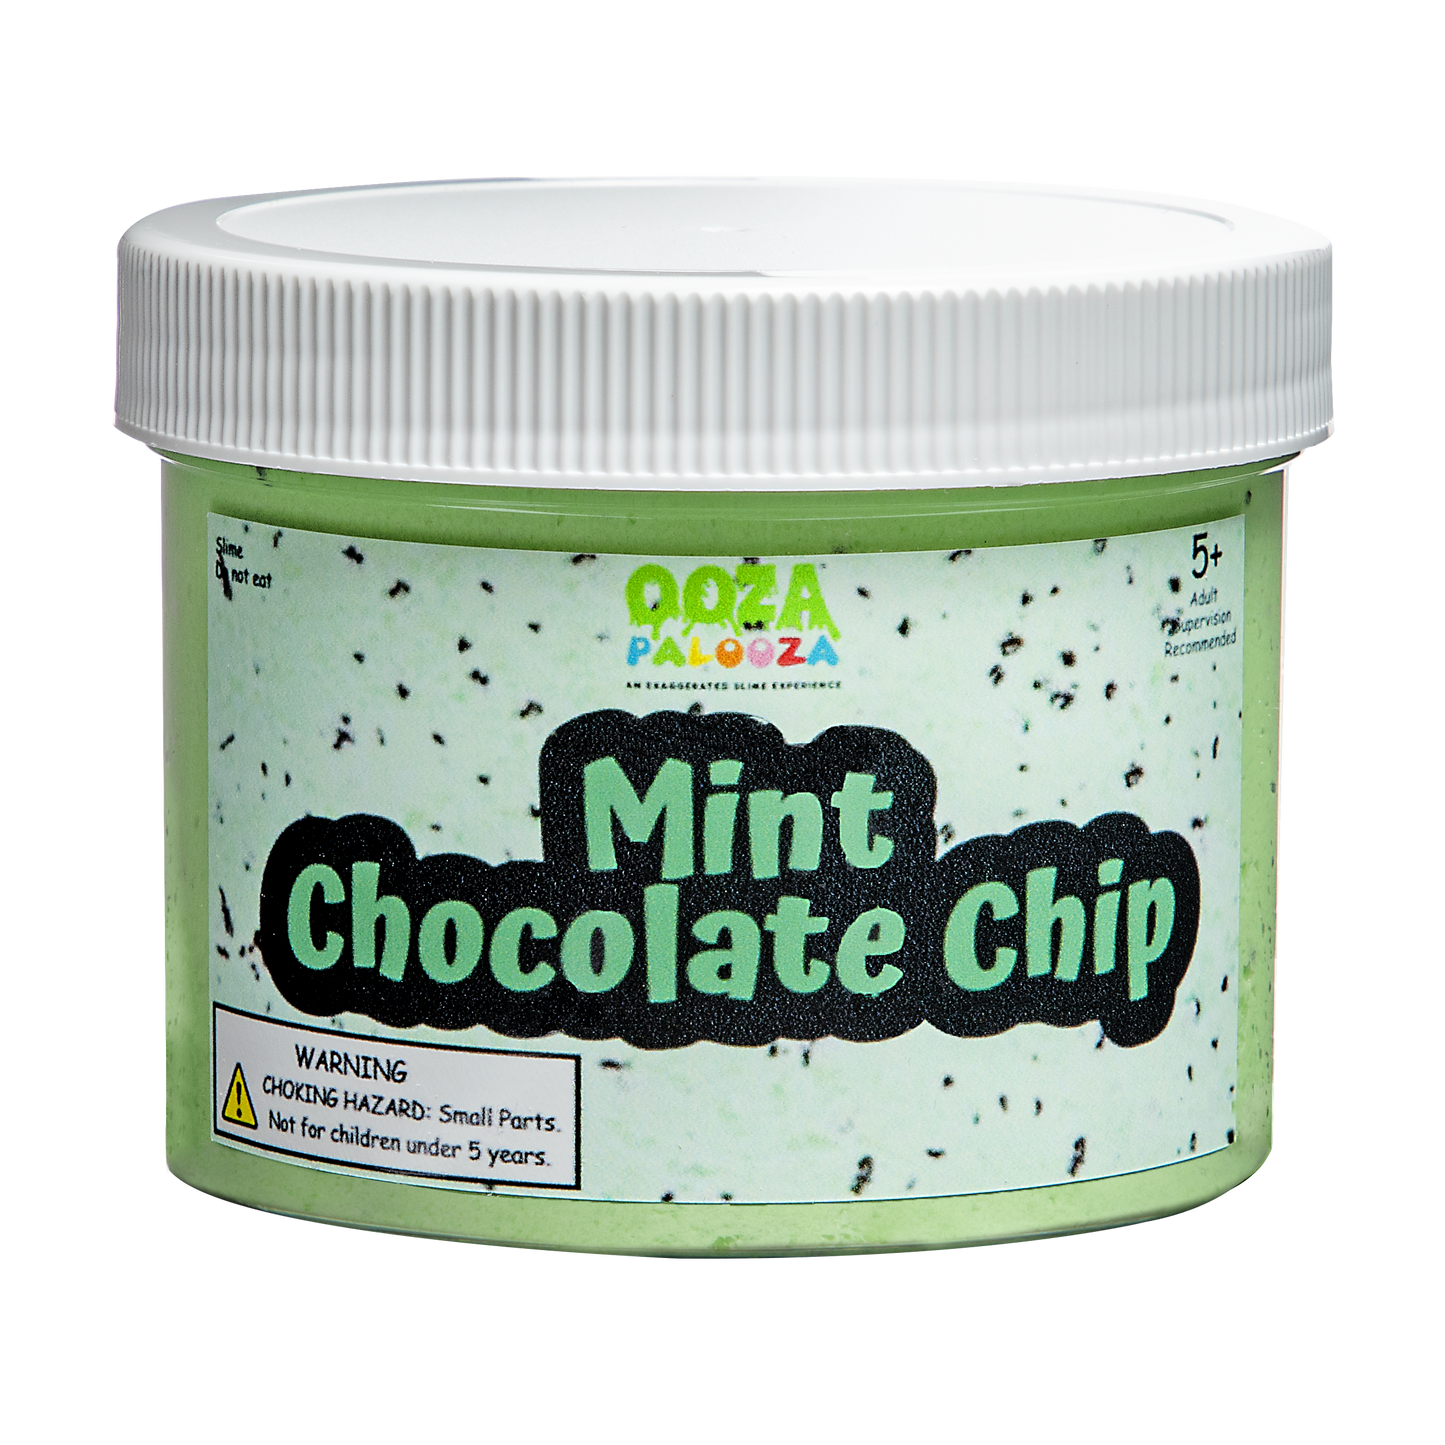 Mint Chocolate Chip Slime